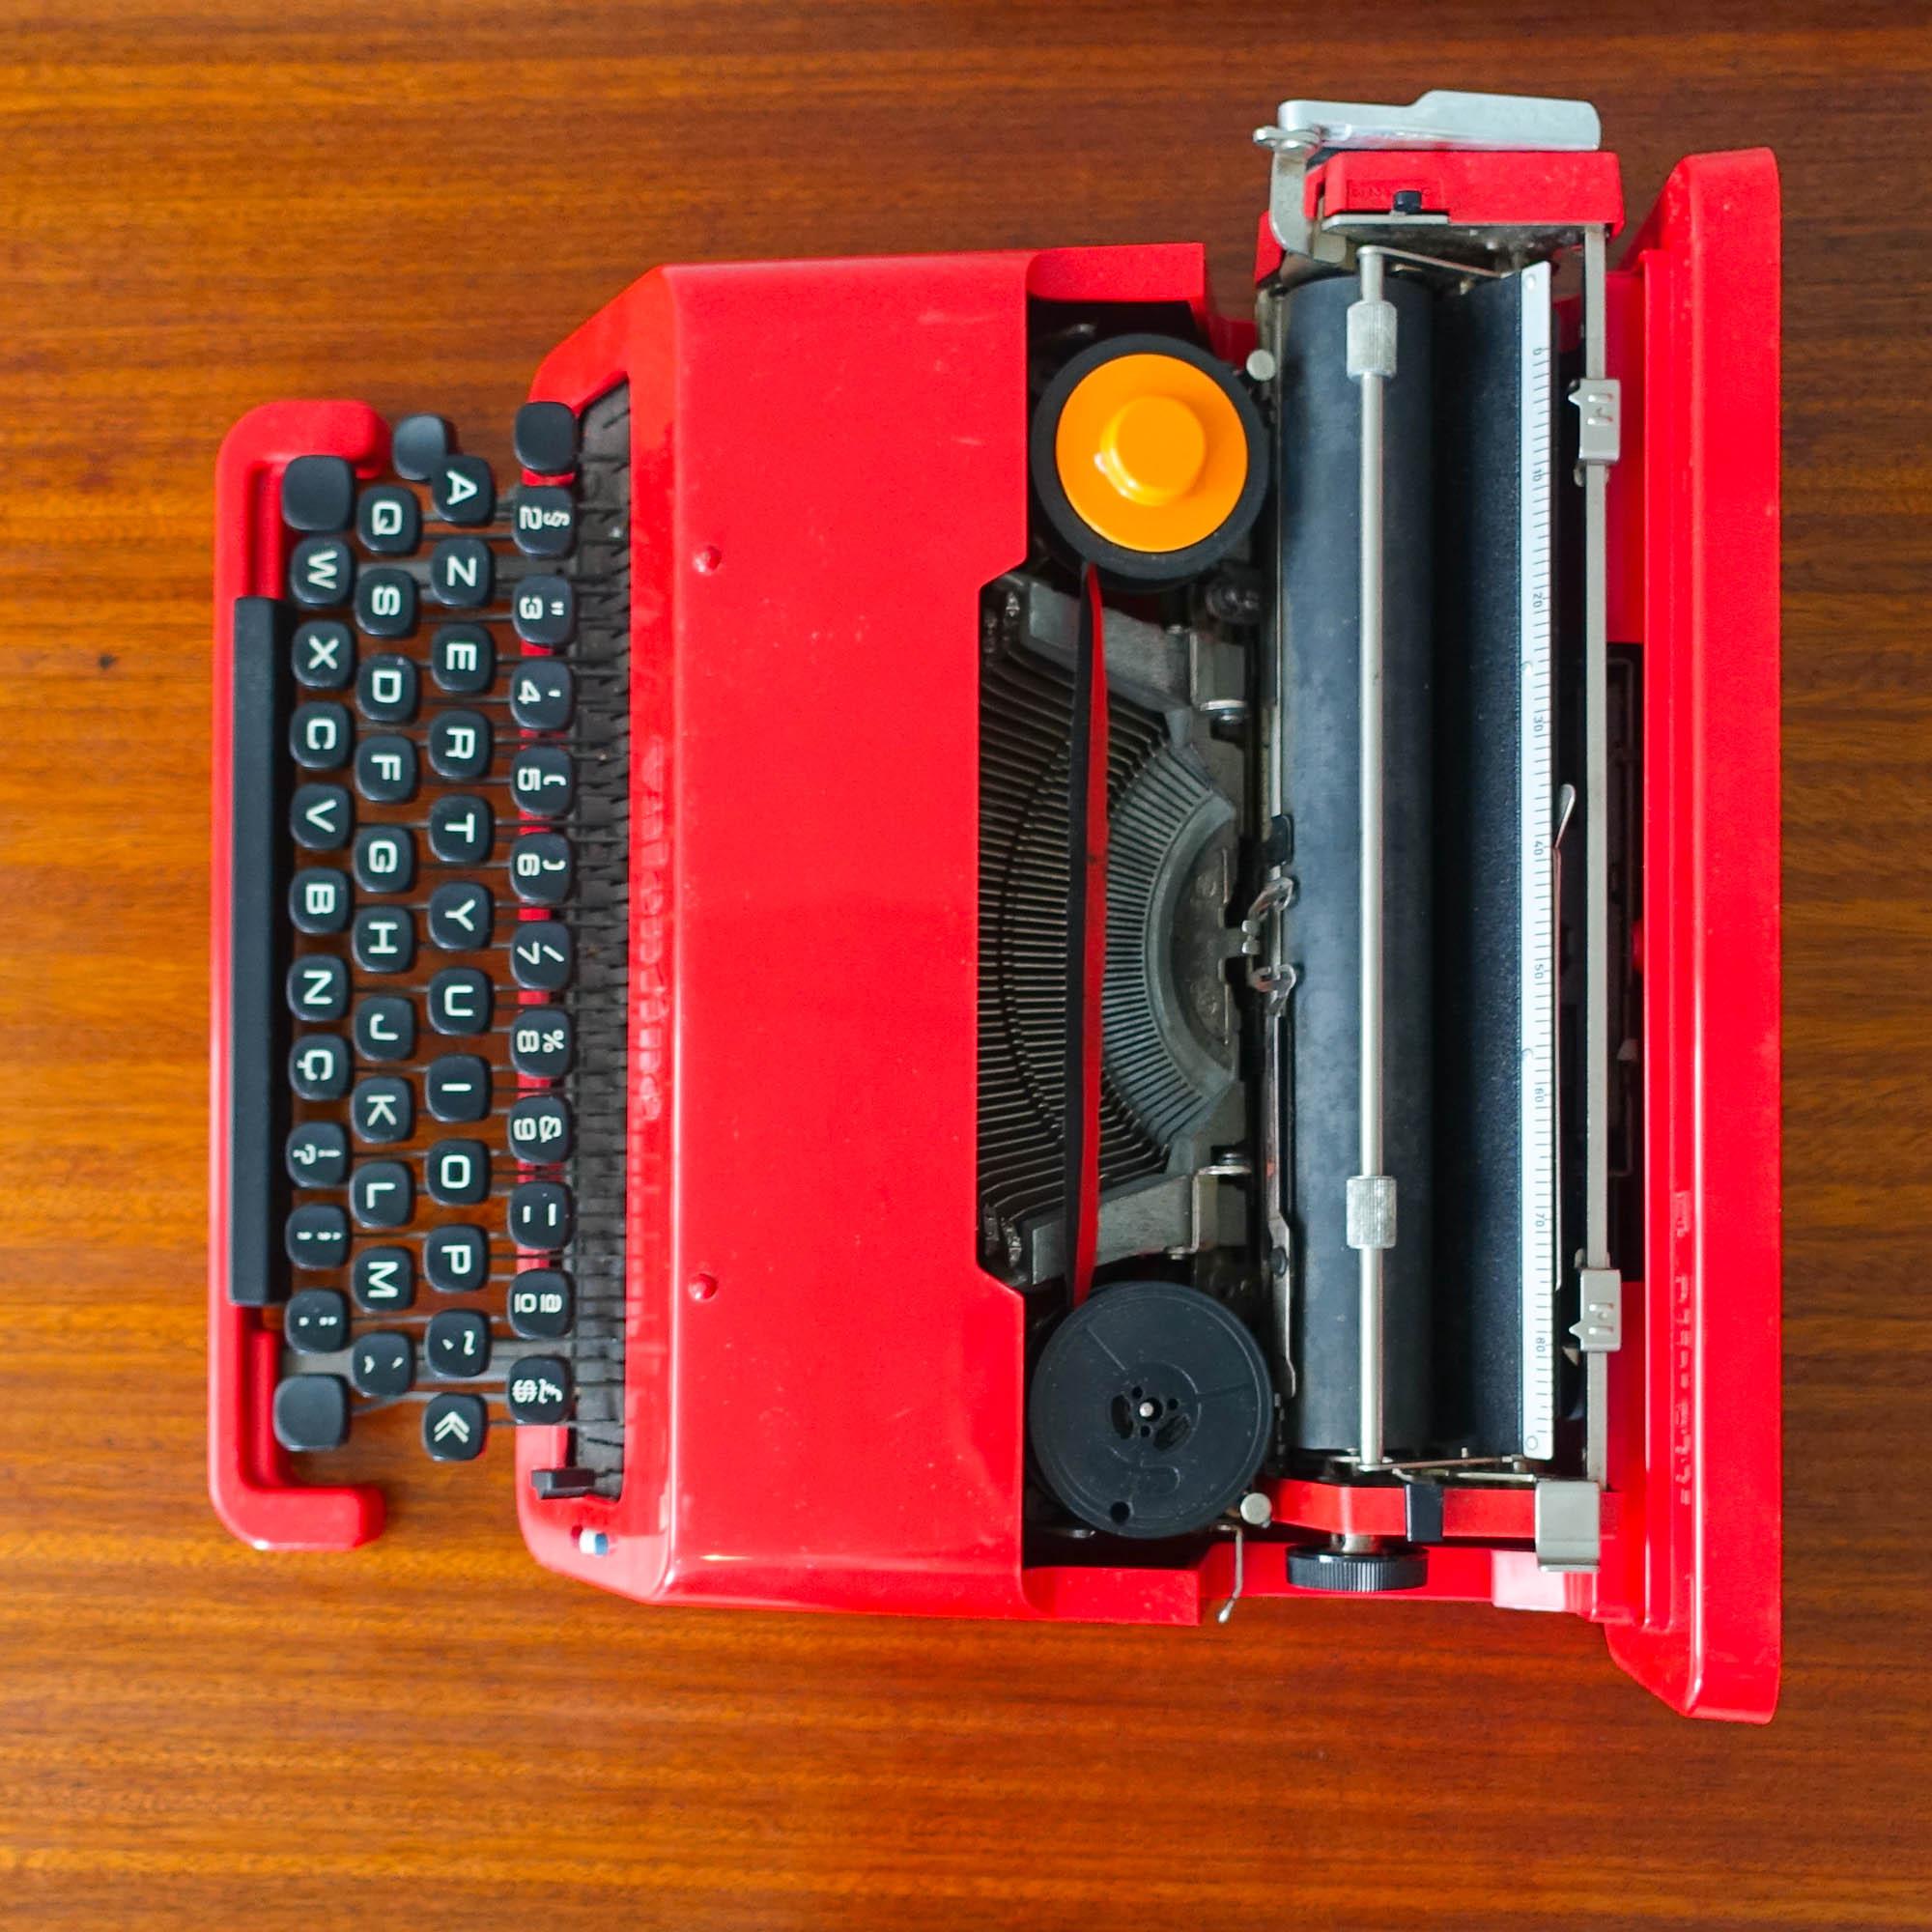 Fin du 20e siècle Type-writer rouge Valentine d'Ettore Sottsass & Perry King pour Olivetti Synthesis